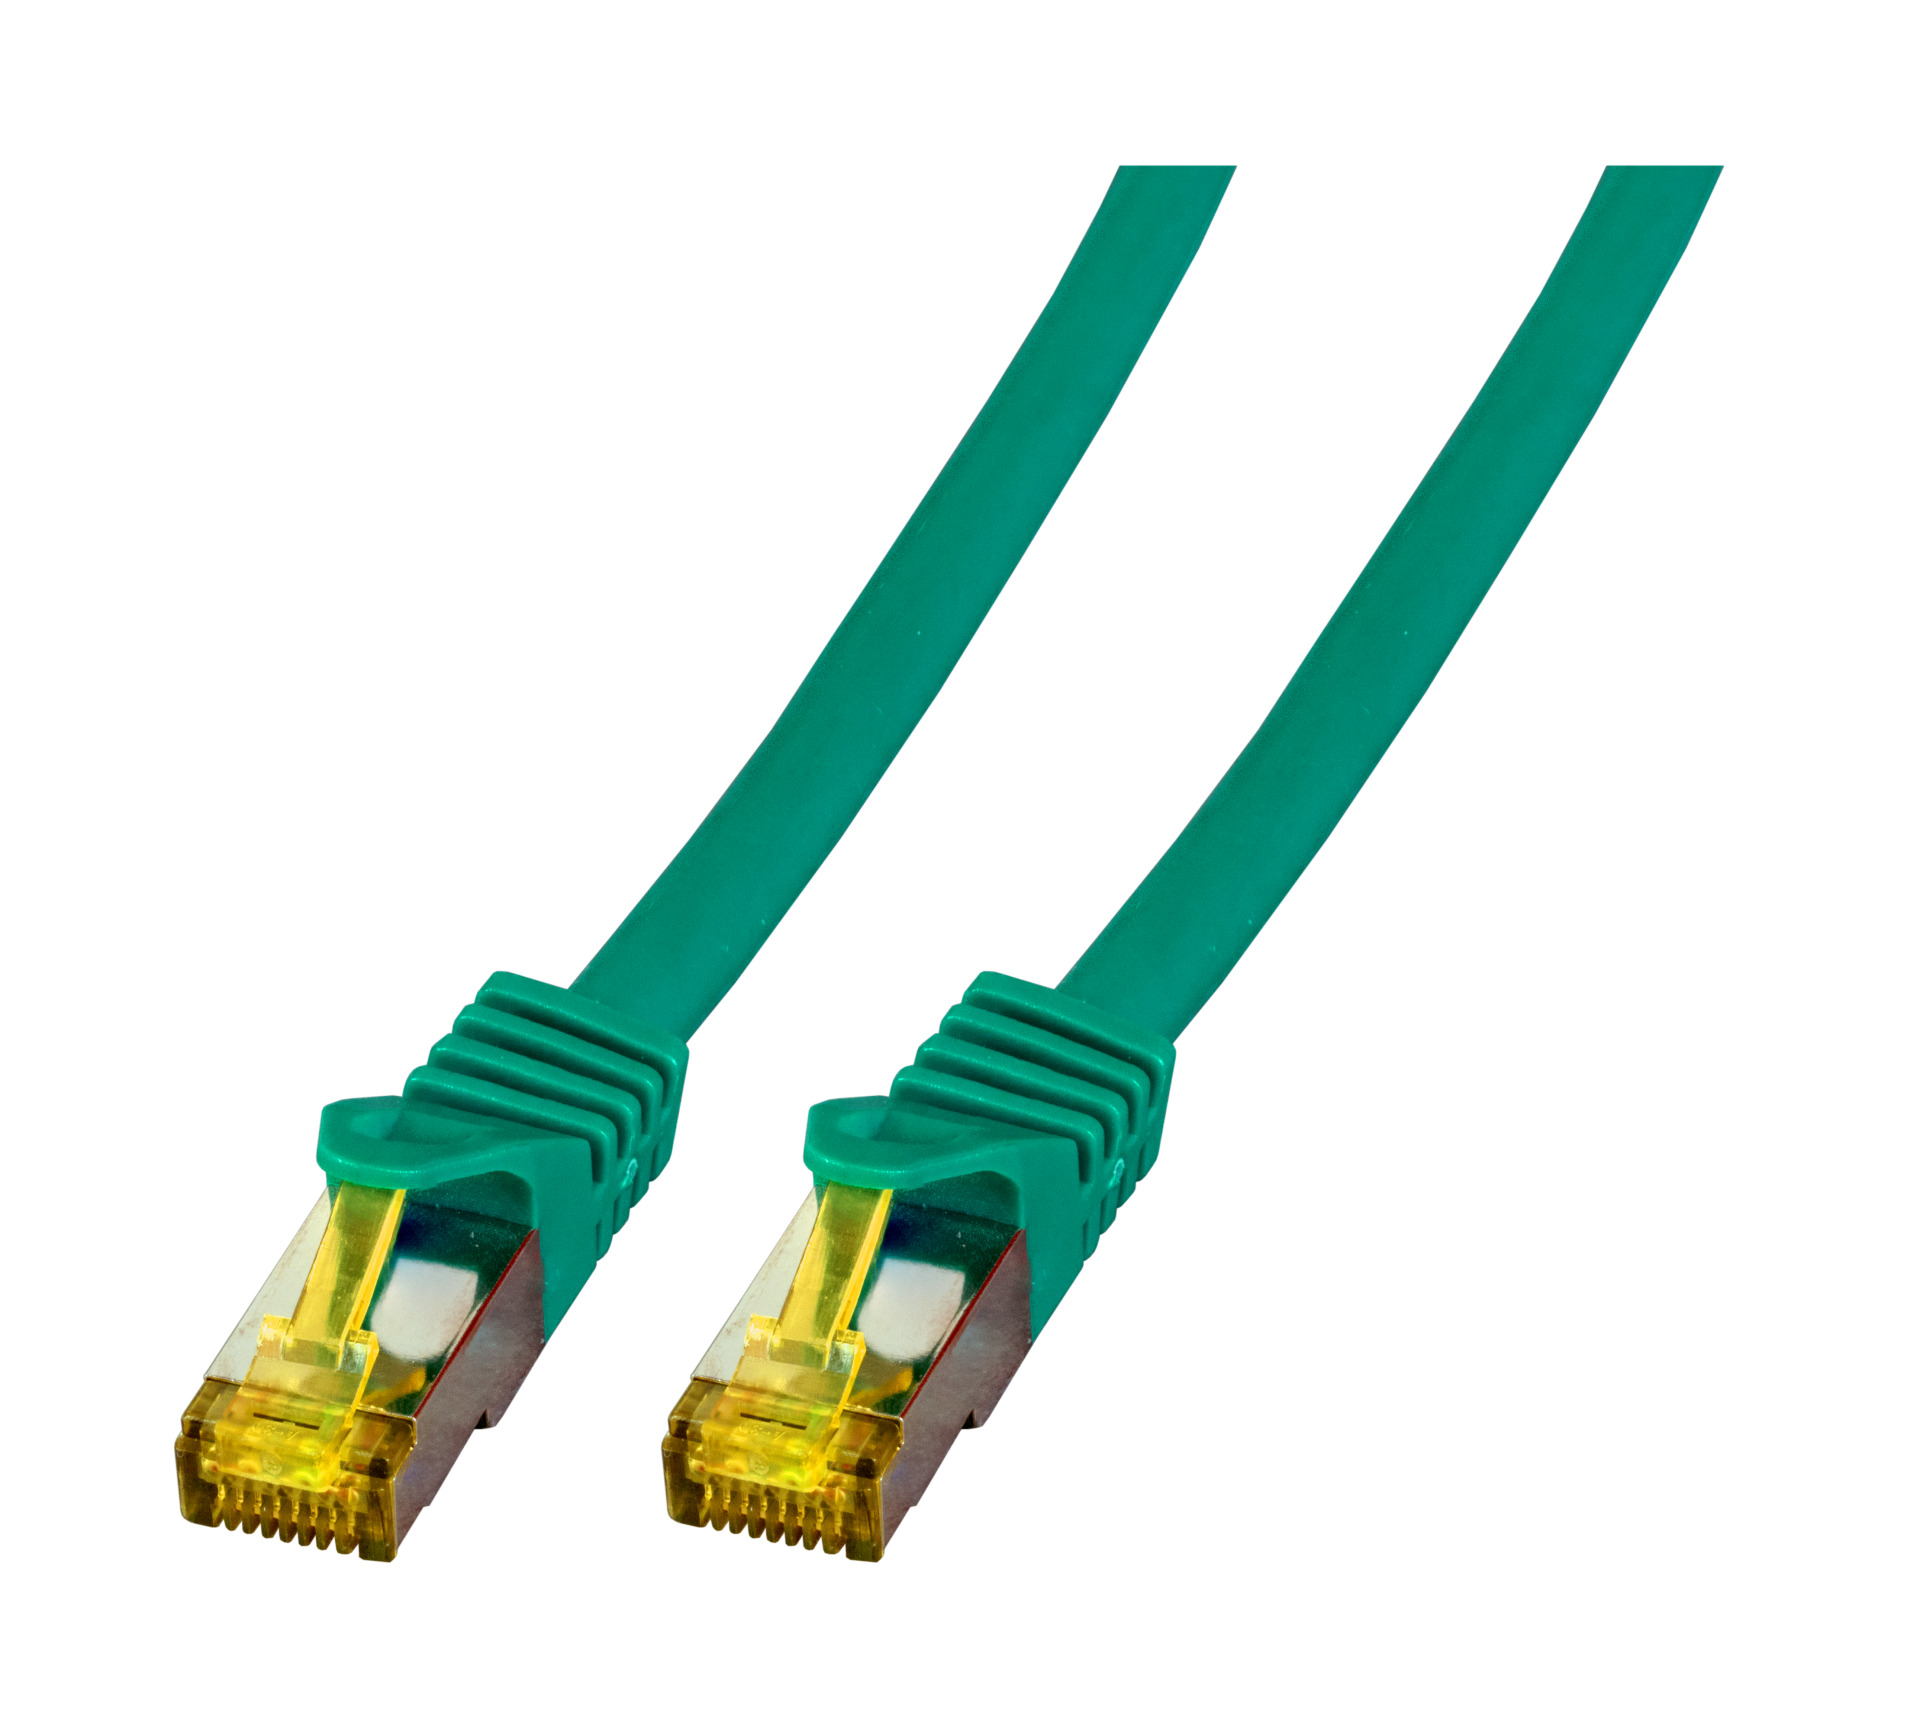 RJ45 Patch cable S/FTP, Cat.6A, LSZH, Cat.7 Raw cable, 1m, green